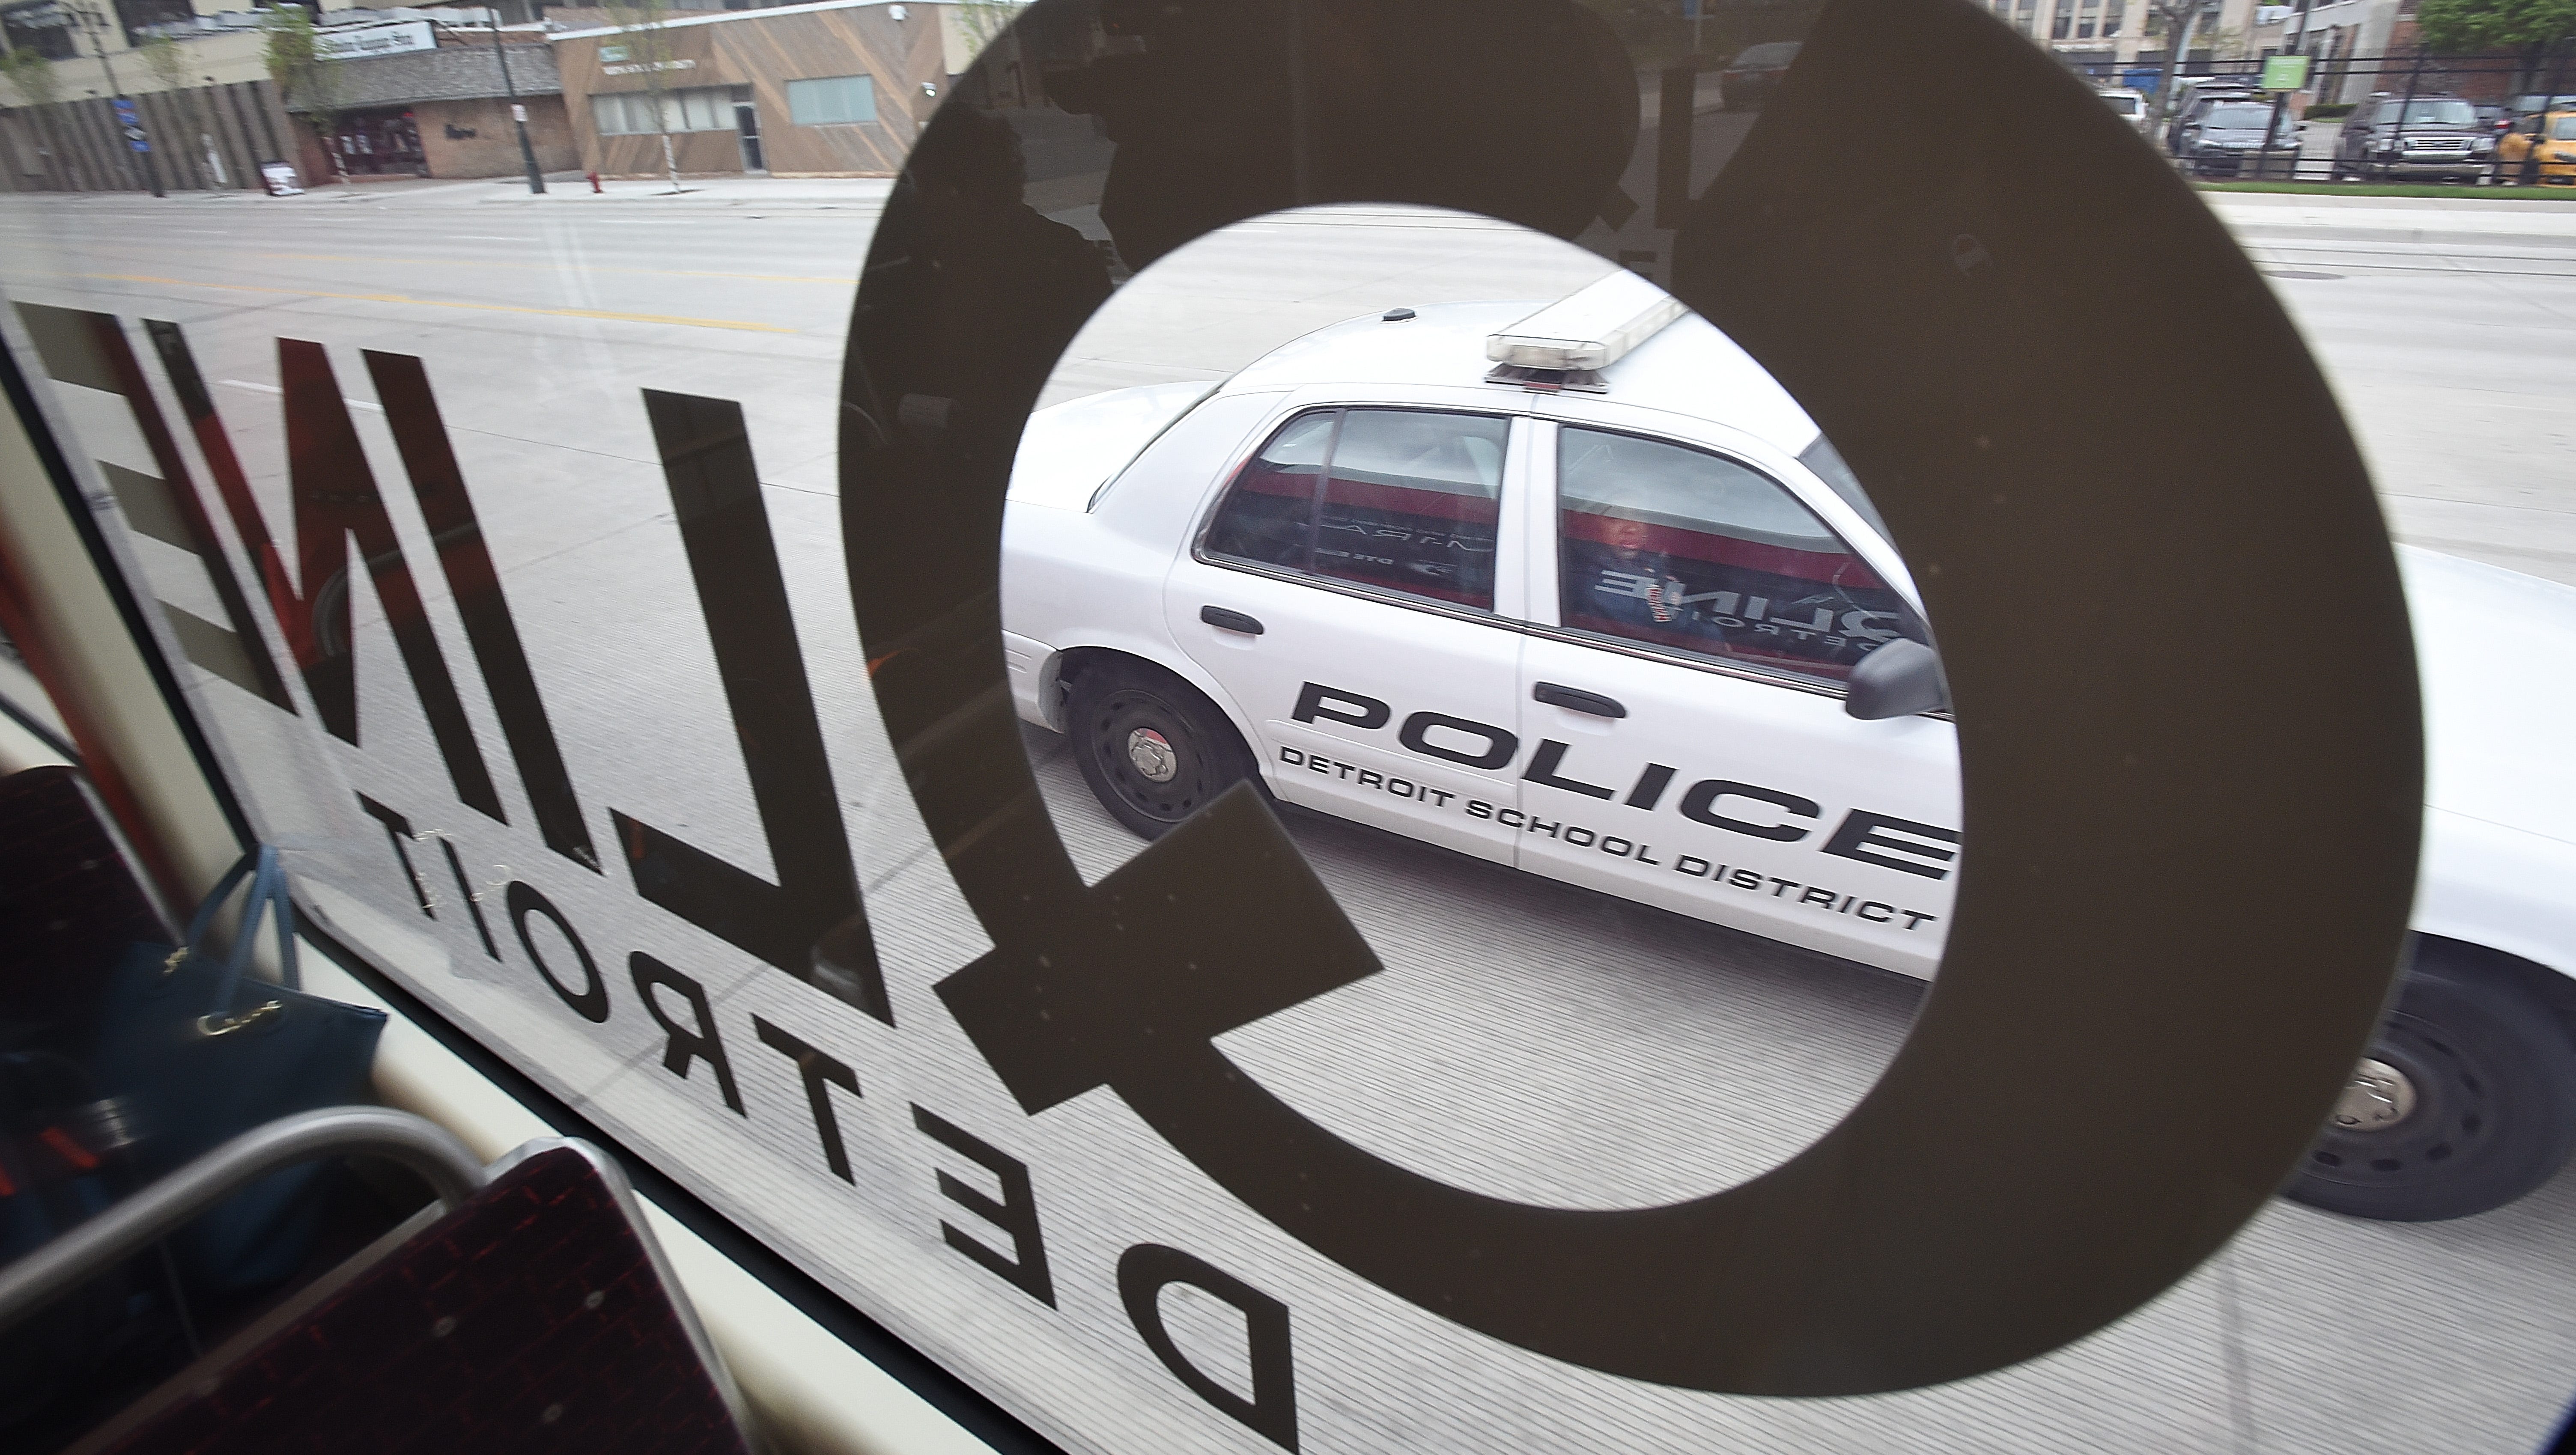 A Detroit School District police car passes by the Q-Line rail on Woodward Ave. near the campus of Wayne State University.